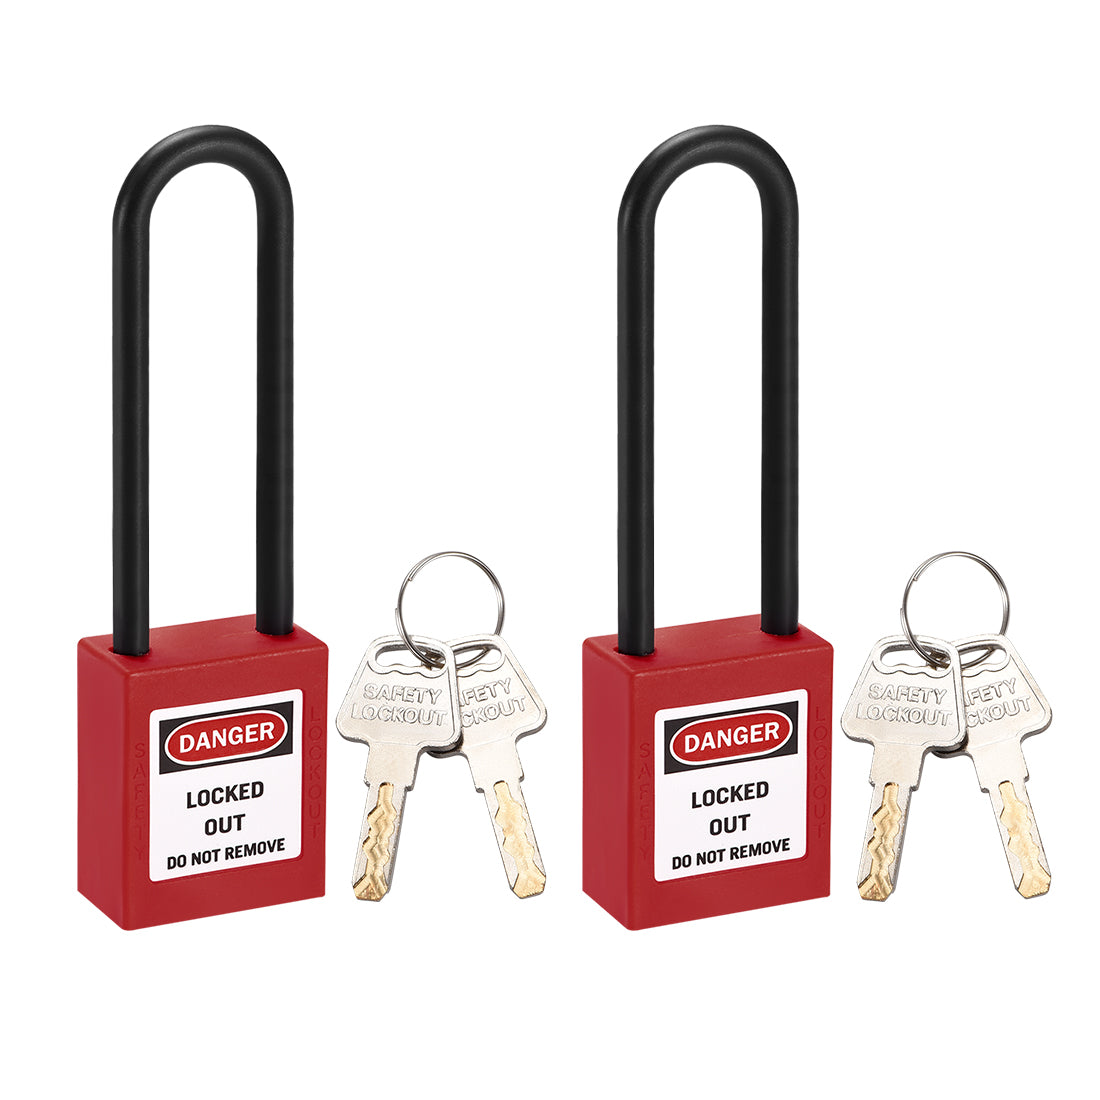 uxcell Uxcell Lockout Tagout Safety Padlock 76mm Nylon Shackle Keyed Different Red 2Pcs